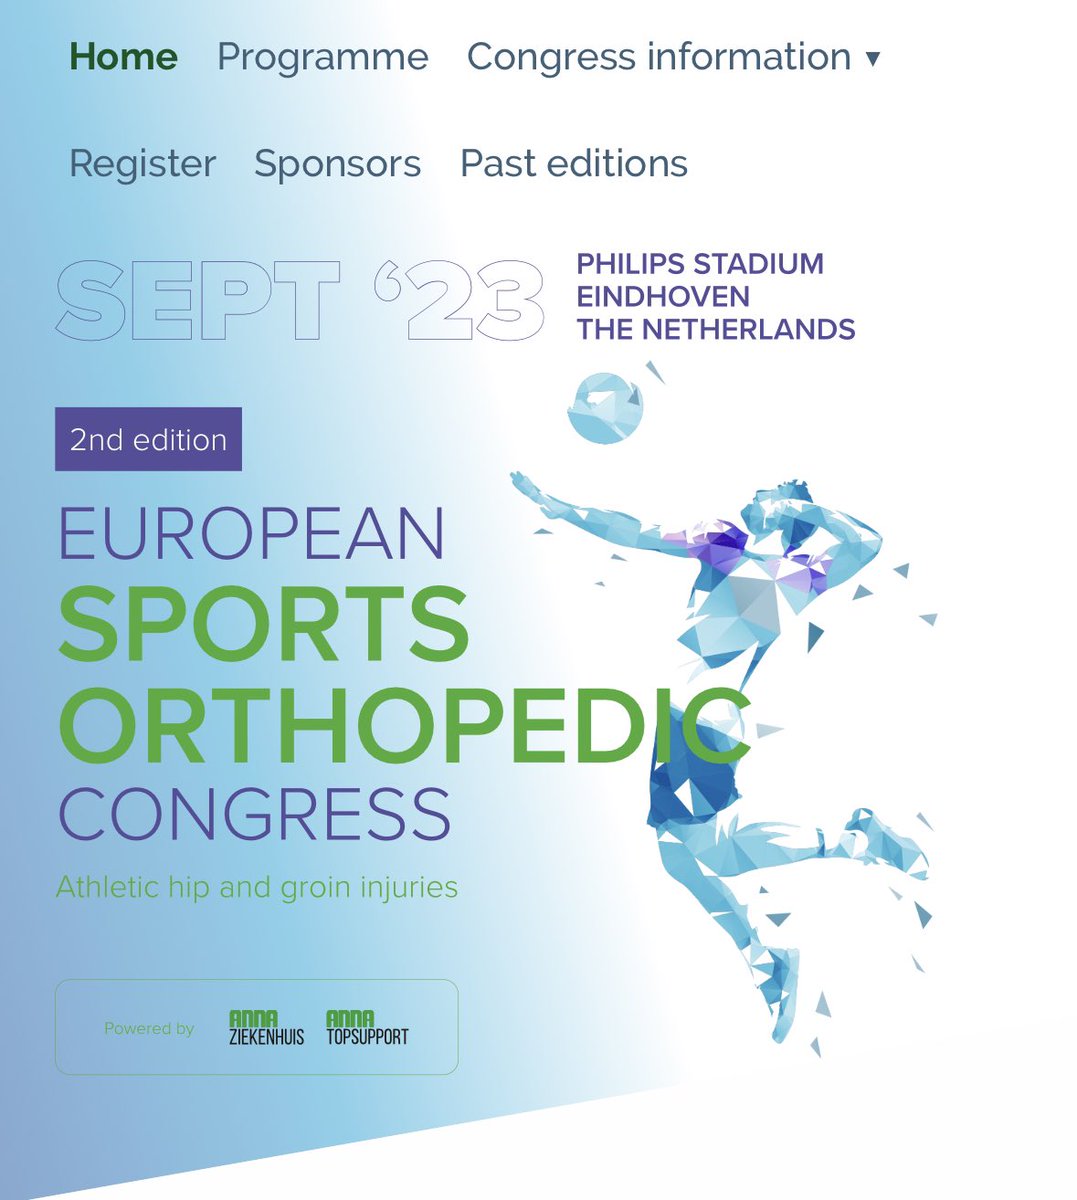 Looking for a conference on hip and groin this autumn? Check out the ESOC in Eindhoven. Friday 22nd Sept In PSV stadium. Line up with @JoanneLKemp @RintjeAgricola @igorjrtak Marsha Tijssen pim v d klij Check out whole programme esoceindhoven.nl/home